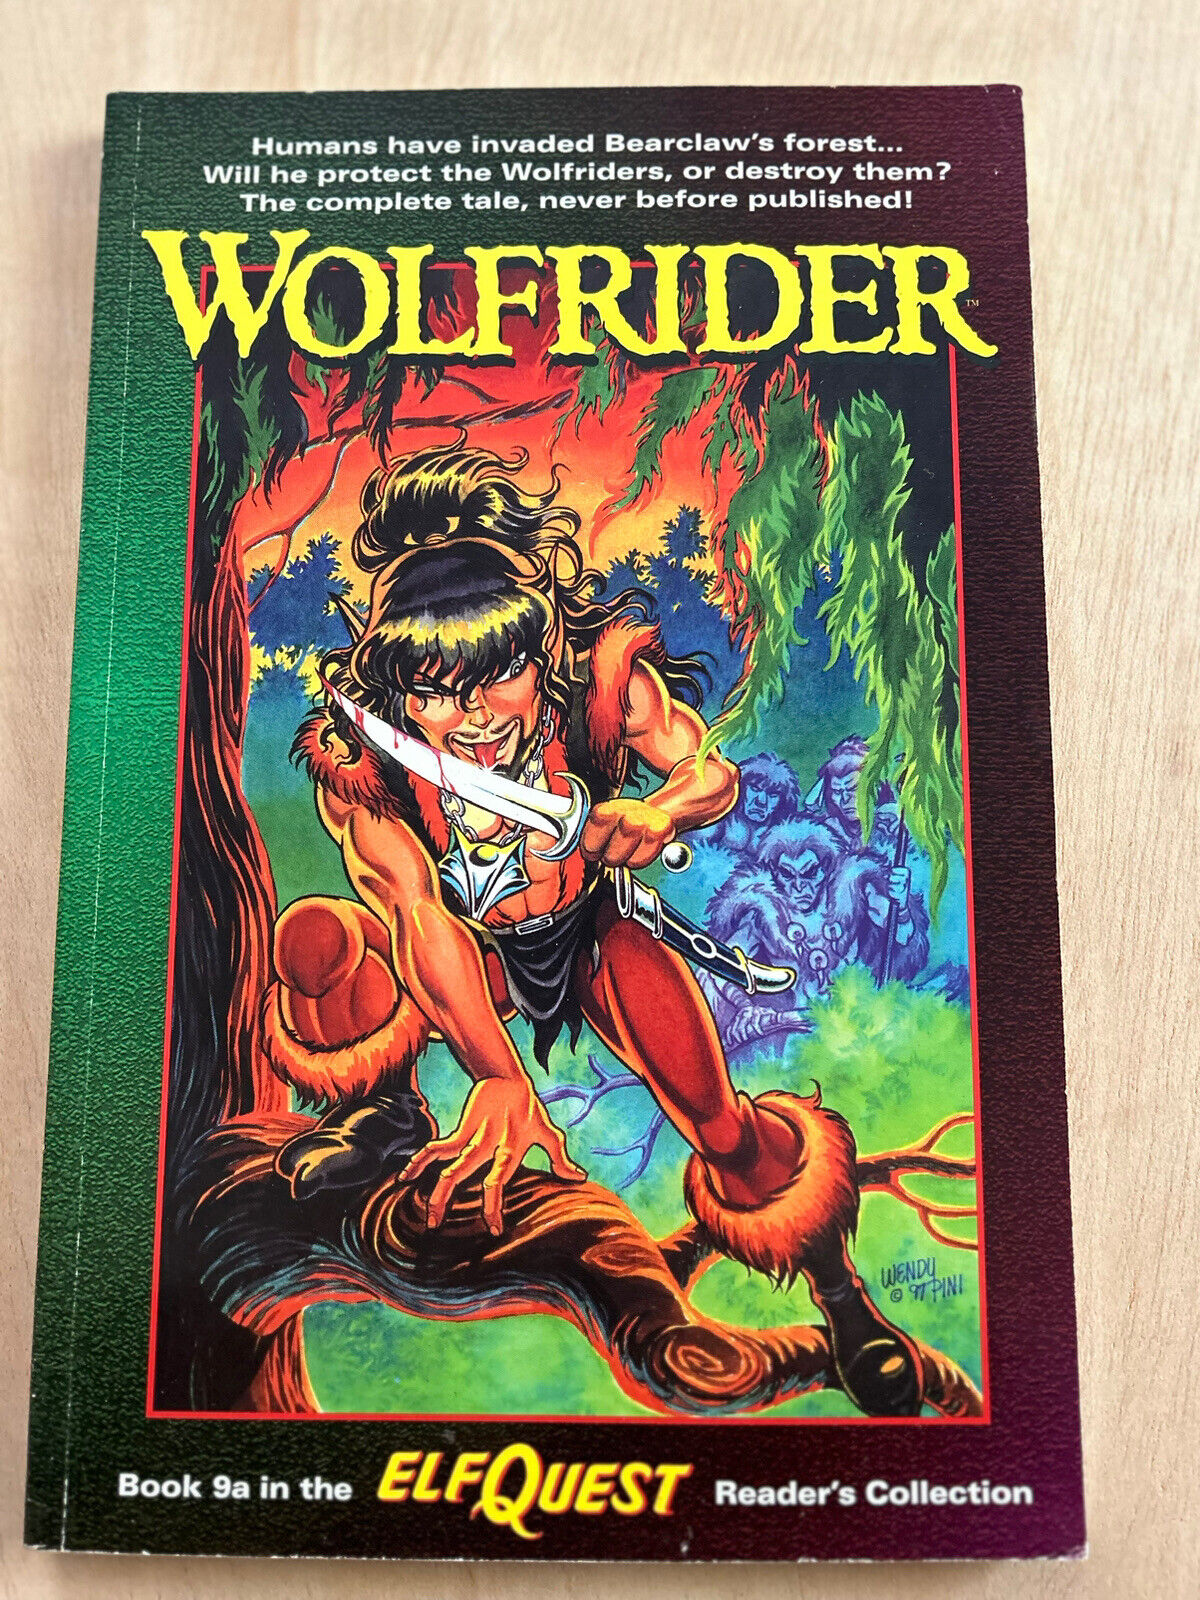 ElfQuest Wolfrider Book 9a Reader's Collection Marx Pini Zugale - Graphic Novel